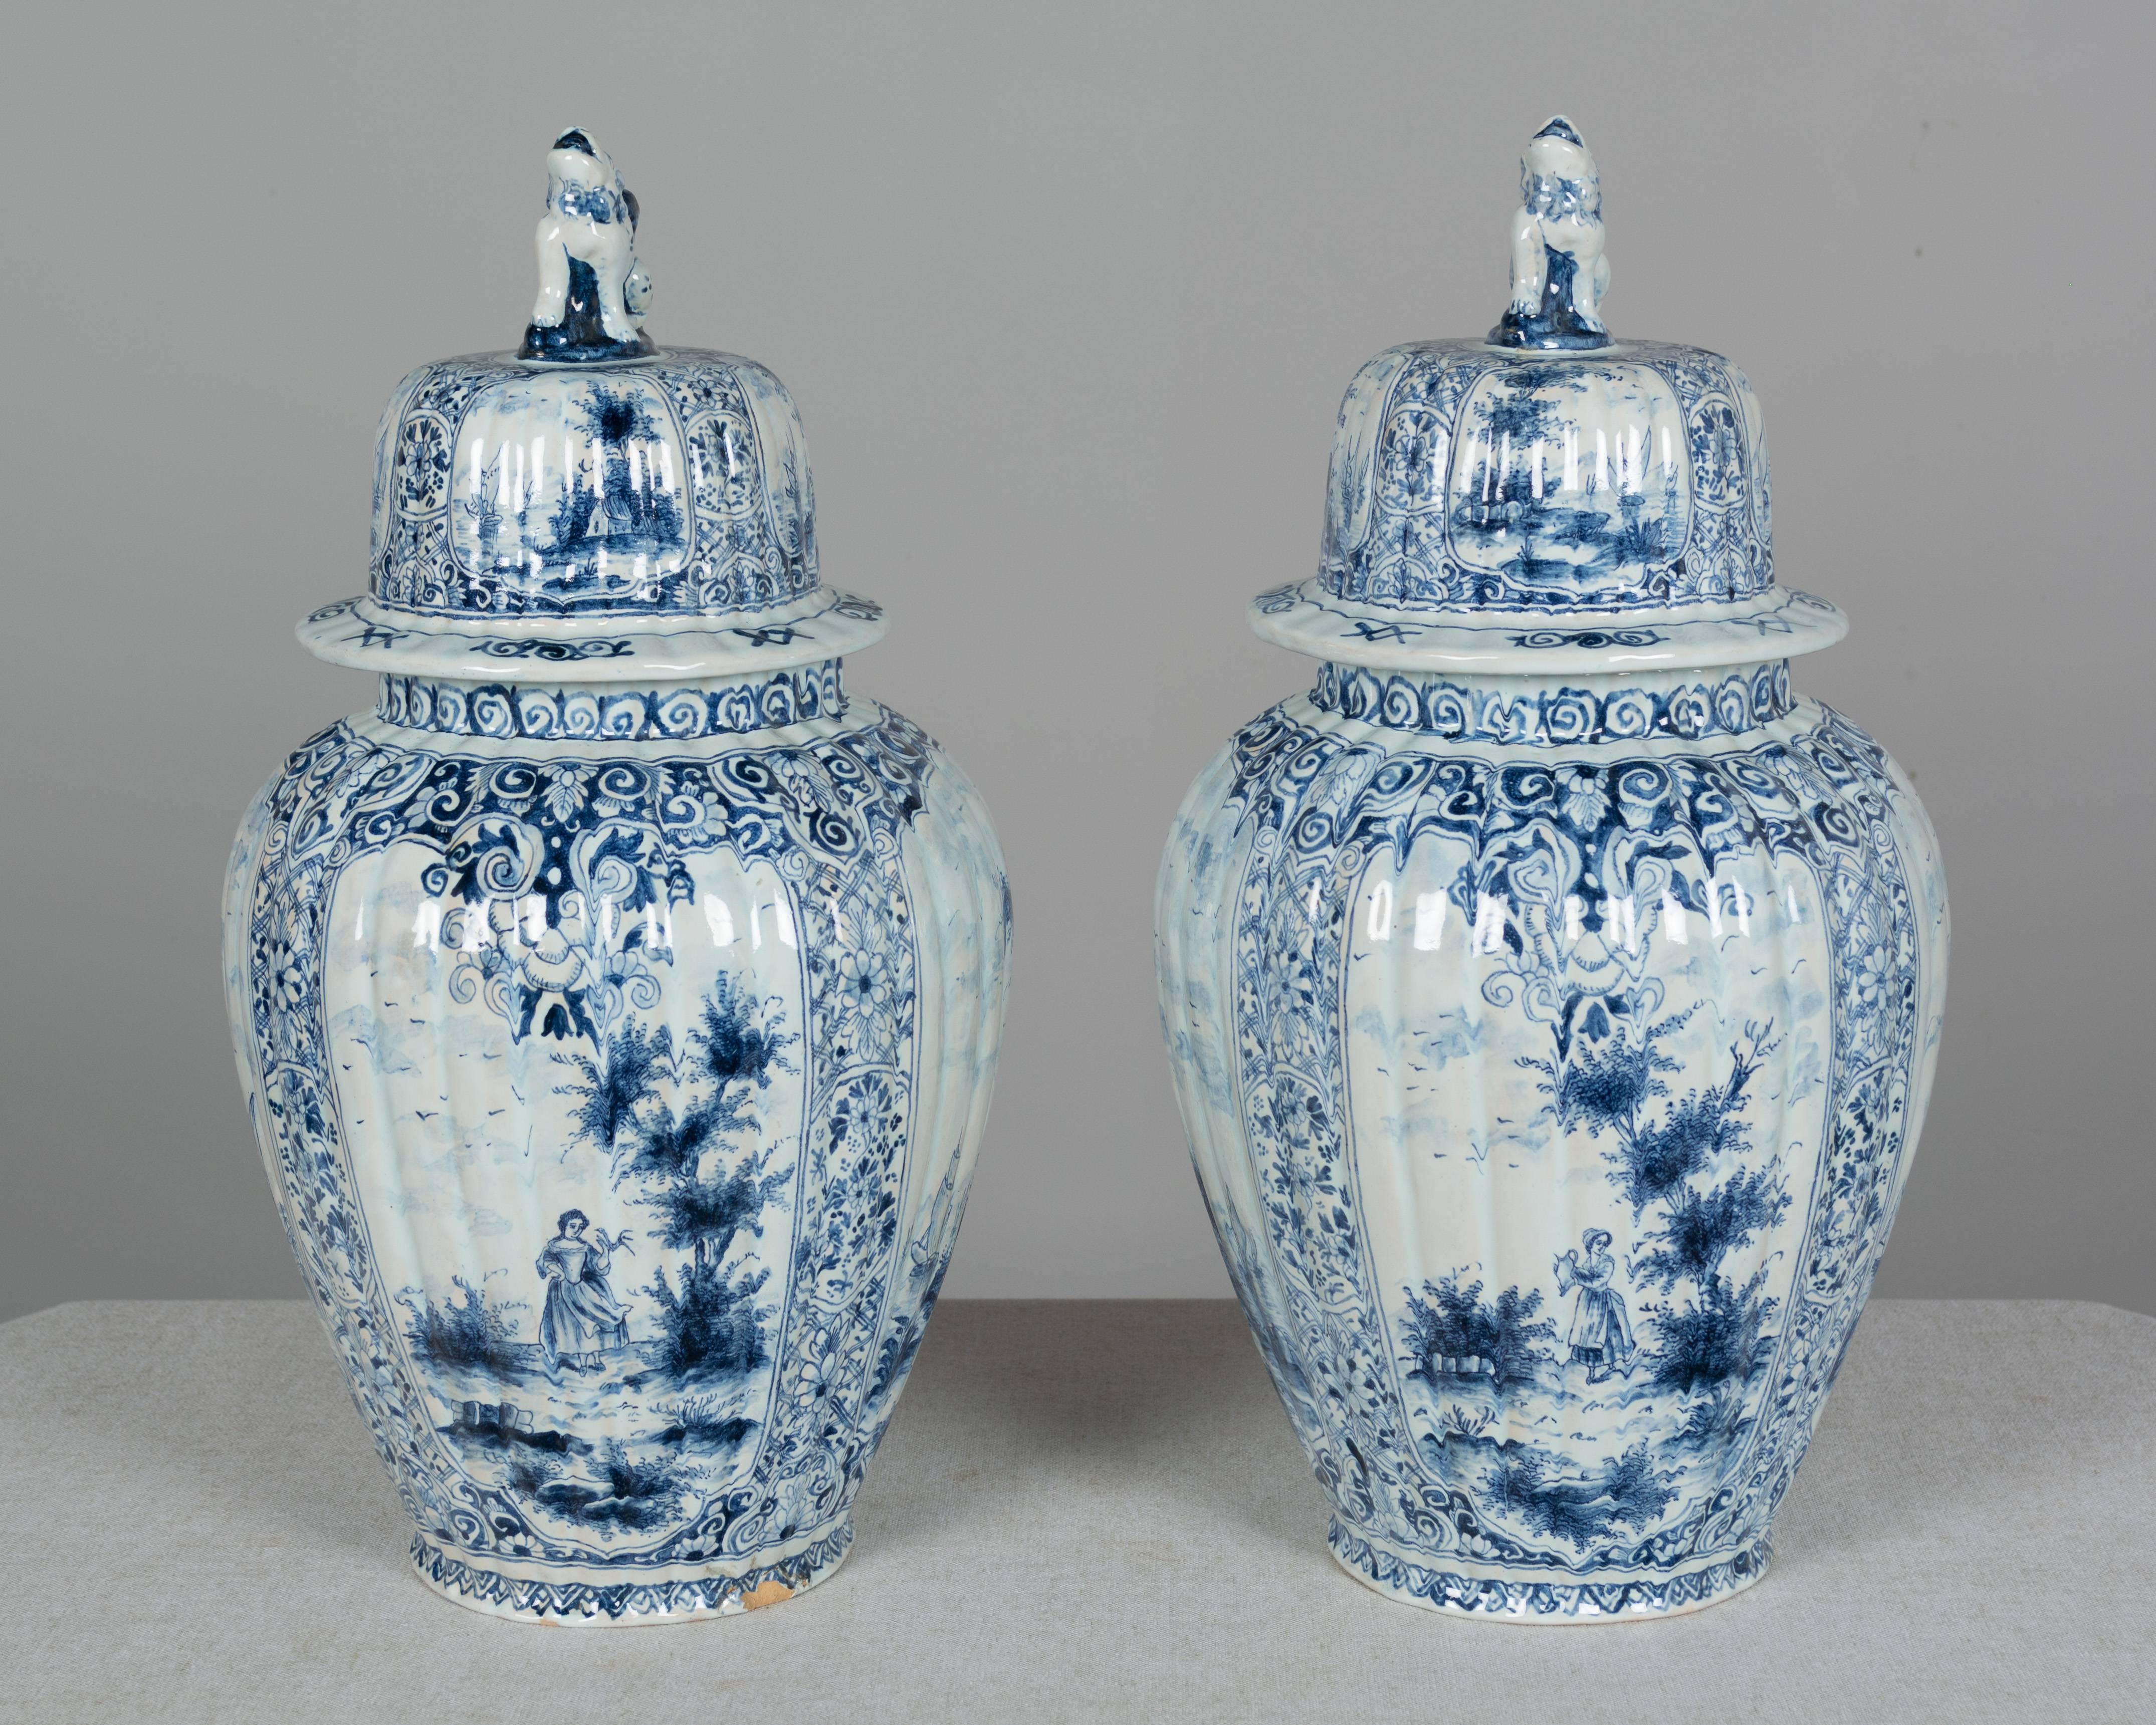 Dutch Pair of Delft Faience Urns